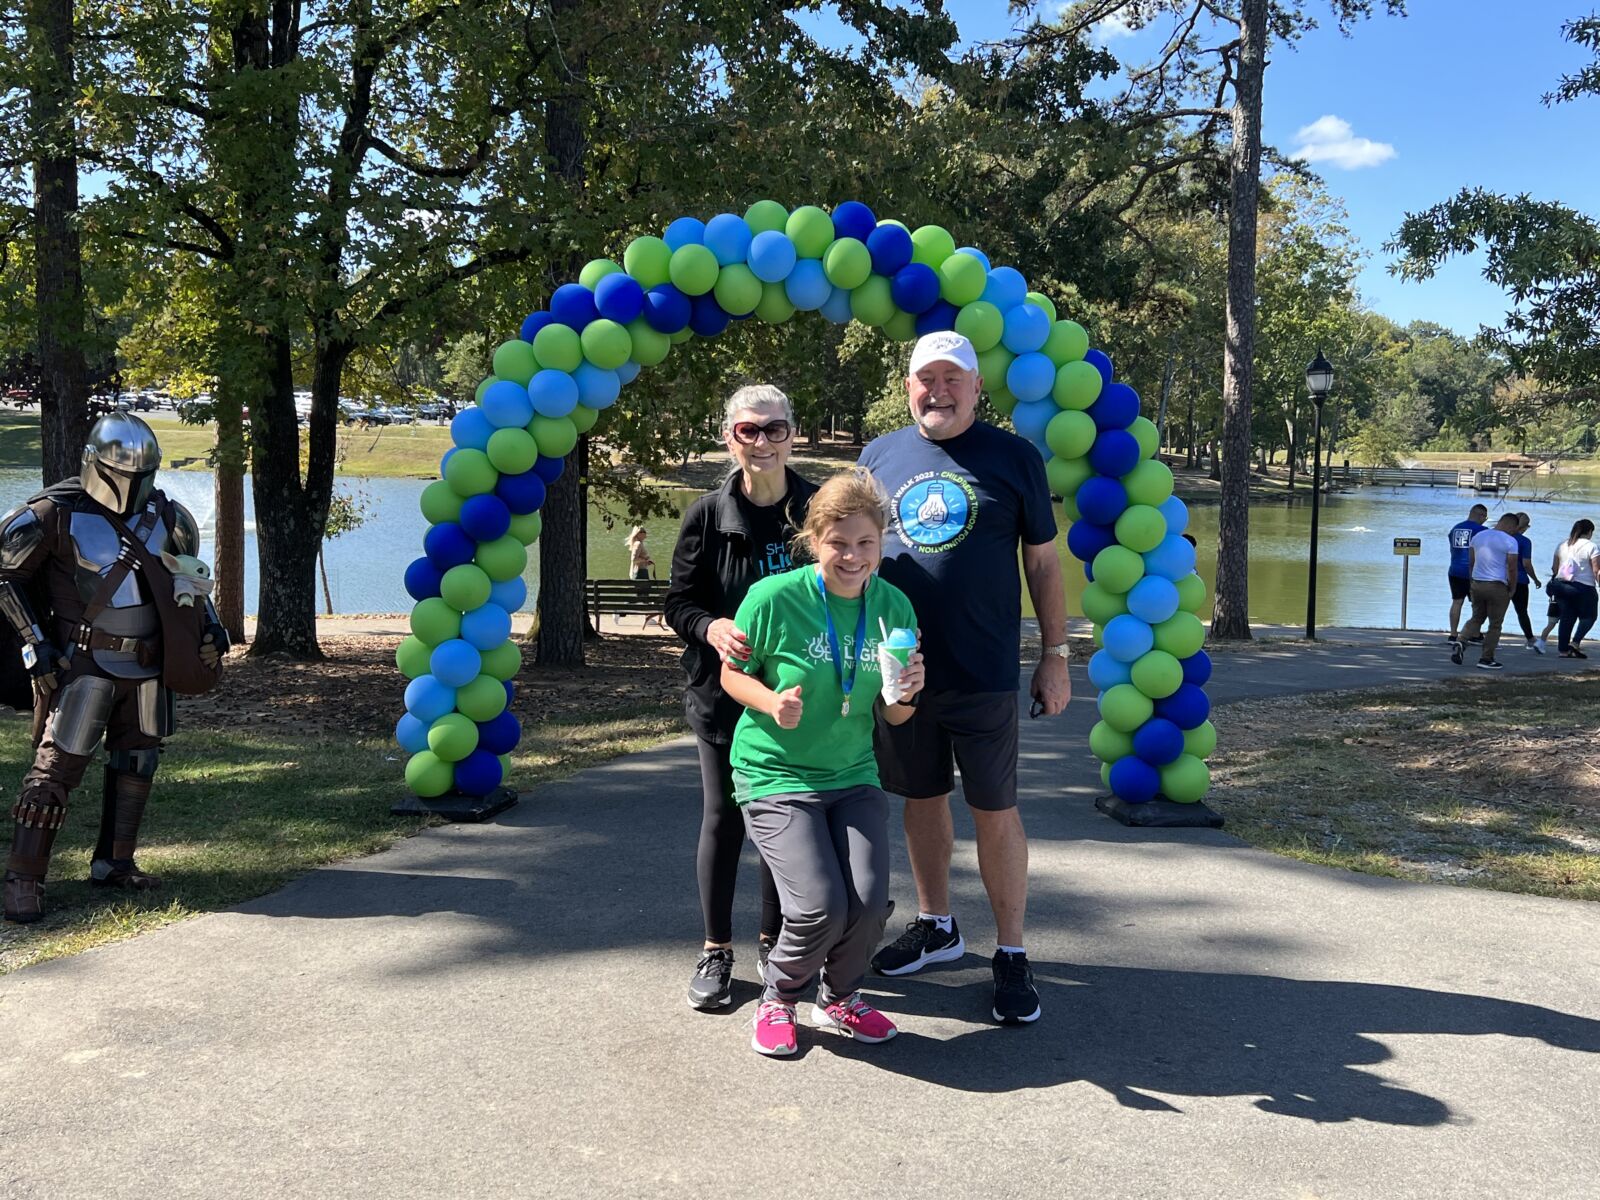 Family poses with a costumed character under a blue and green balloon arch in a park.